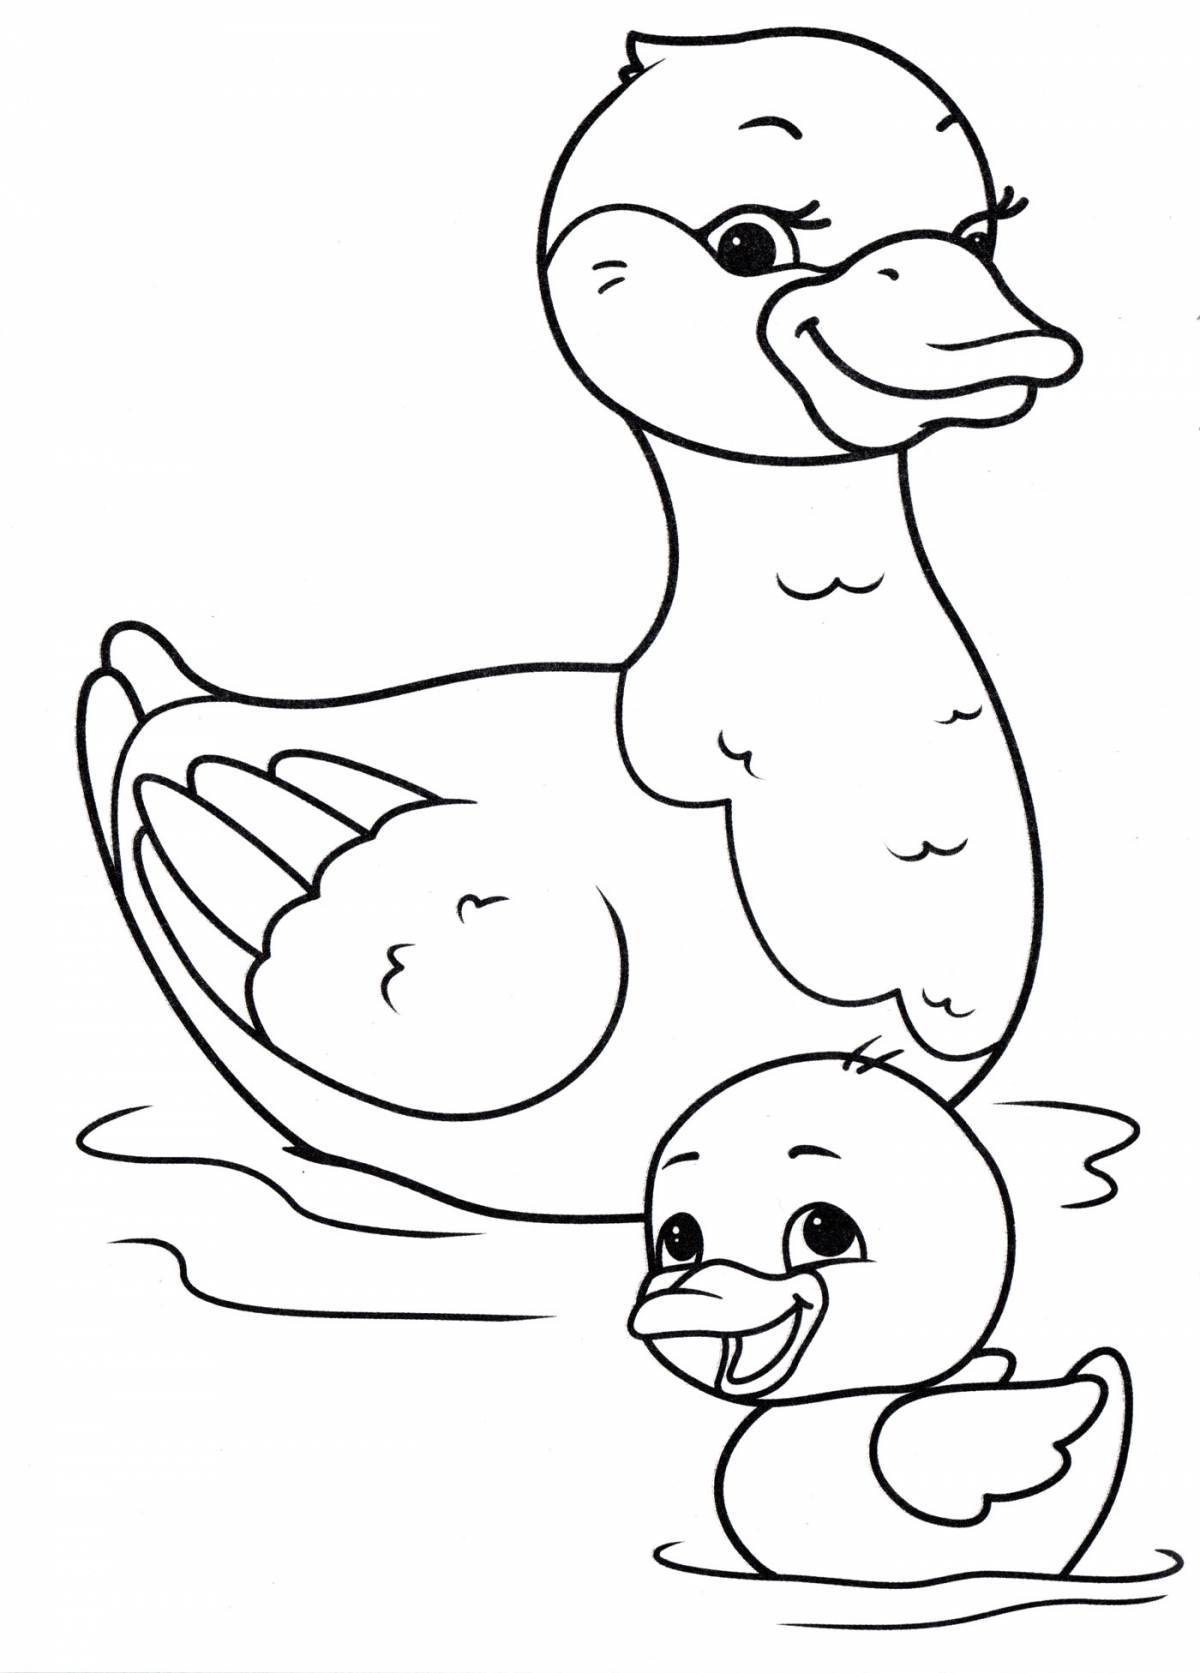 Fancy coloring duckling for kids